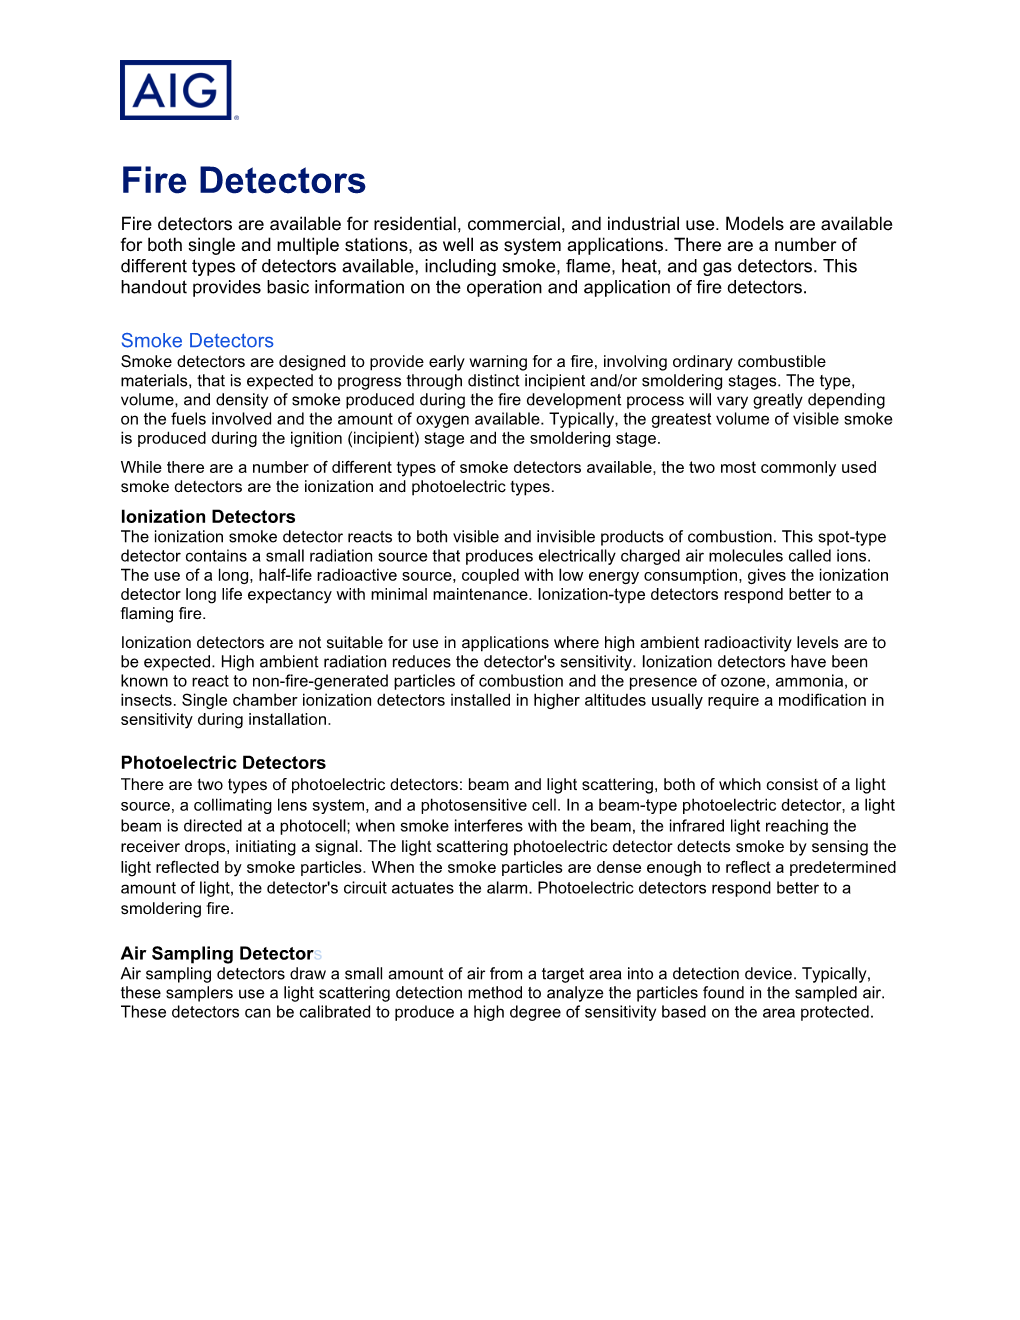 Fire Detectors Fire Detectors Are Available for Residential, Commercial, and Industrial Use